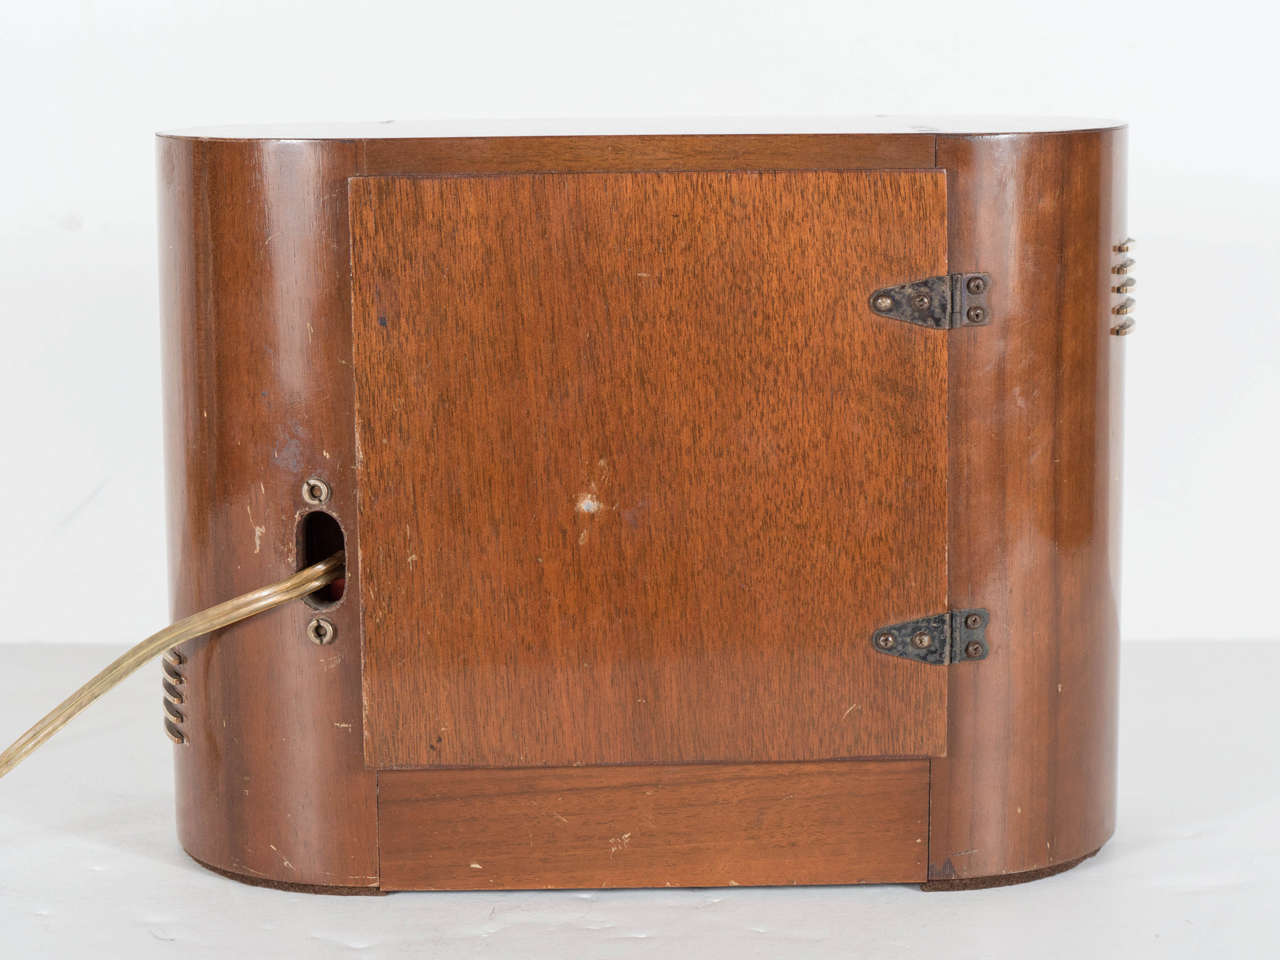 American Streamlined Electric Art Deco Clock by Seth Thomas in Bookmatched Walnut